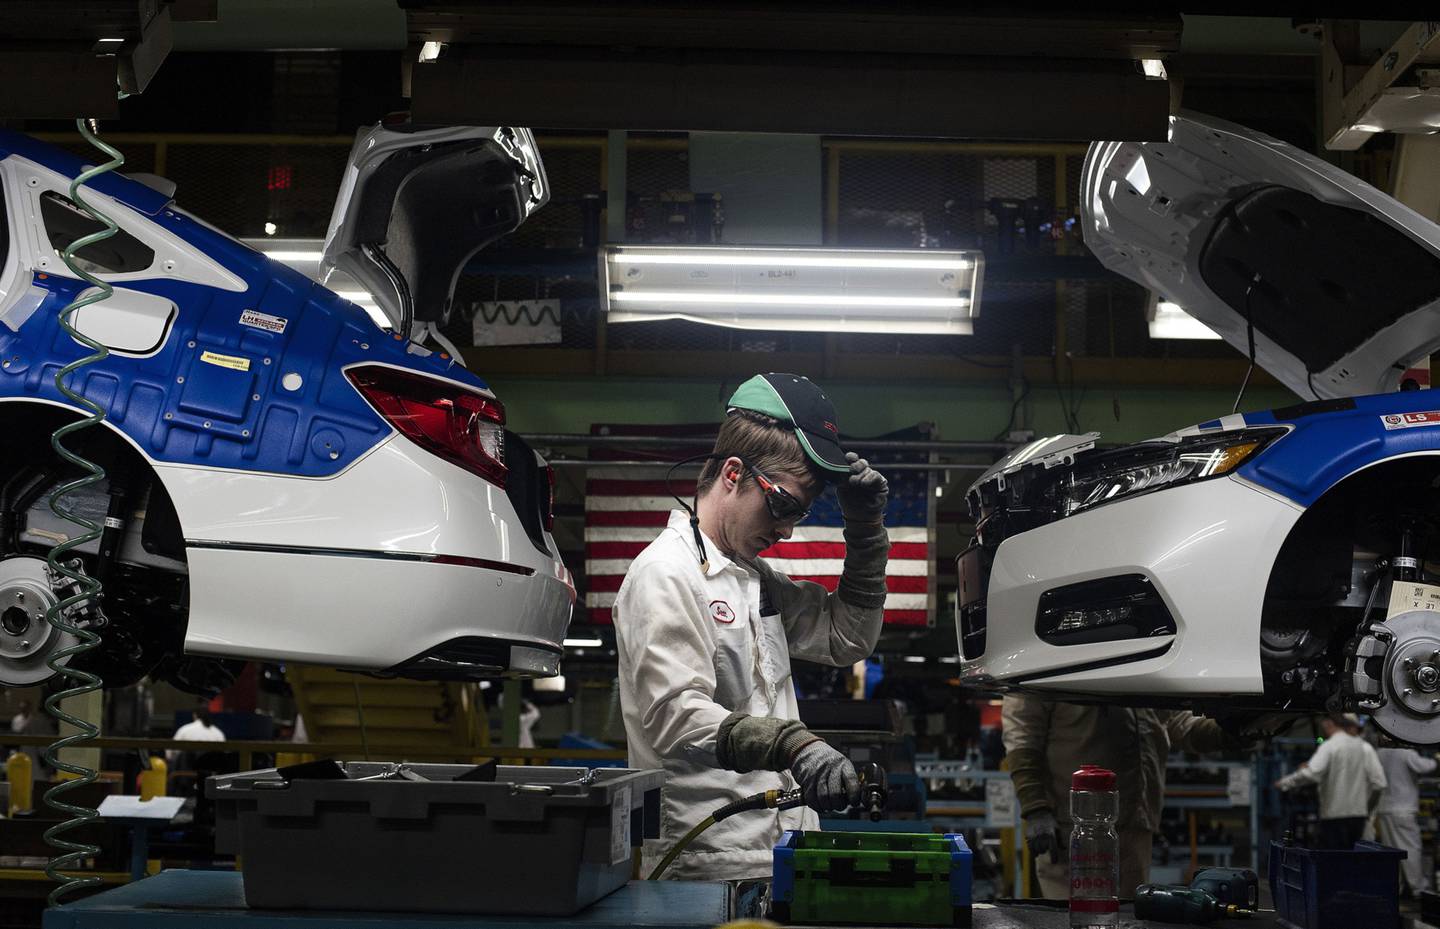 A production associate adjusts his hat while working between 2018 Honda Accord vehicles during production at the Honda of America Manufacturing Inc. Marysville Auto Plant in Marysville, Ohio, U.S.Photographer: Ty Wright/Bloomberg